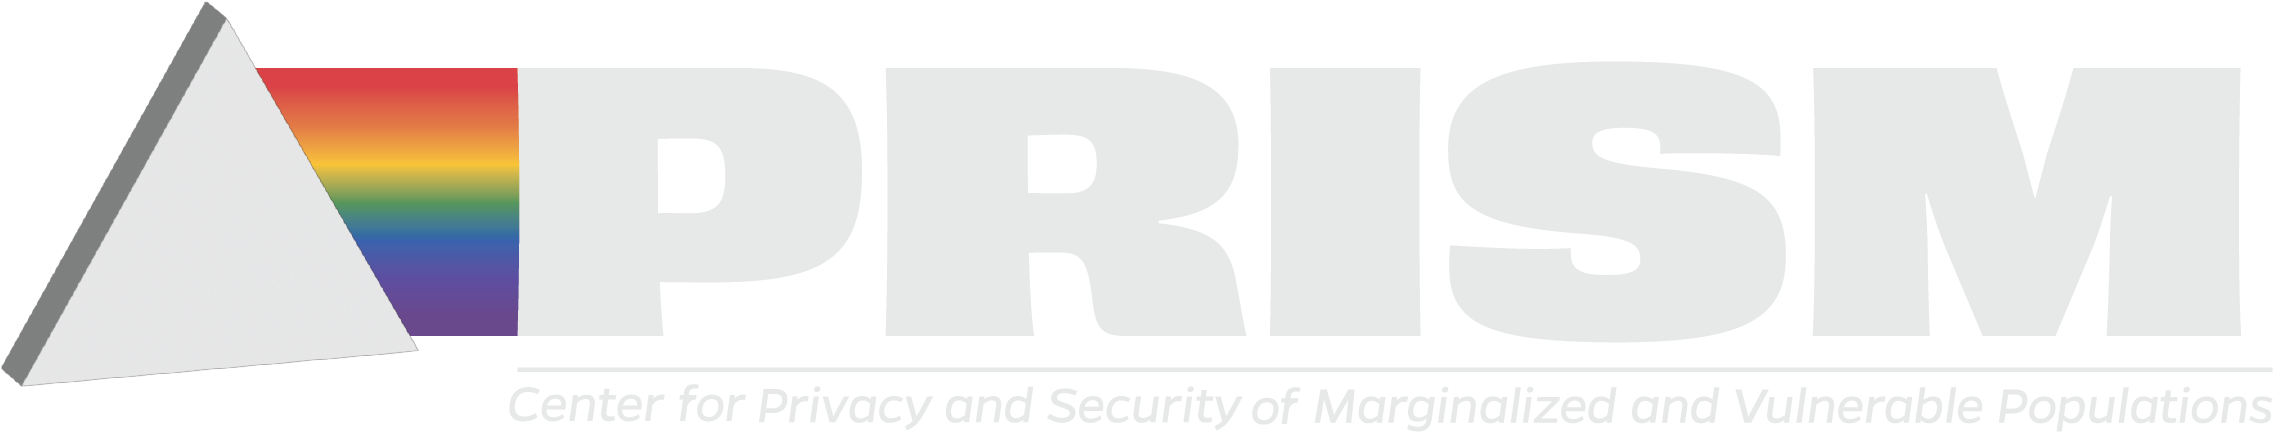 The Center for Privacy and Security for Marginalized and Vulnerable Populations (PRISM)